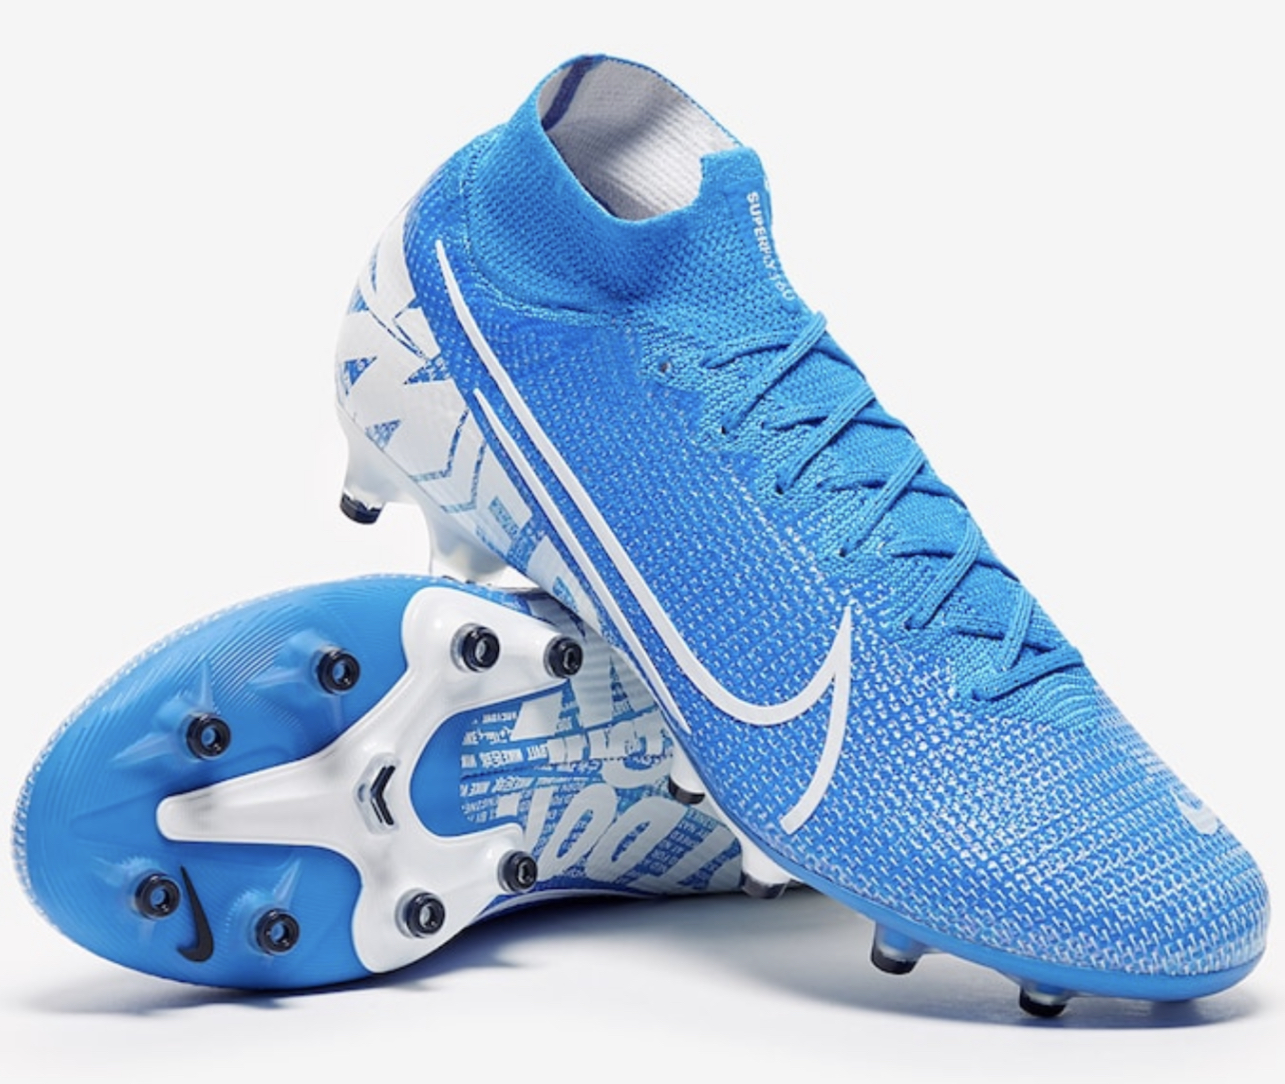 Nike Mercurial Superfly 7 Elite FG Firm Ground Soccer Cleat.